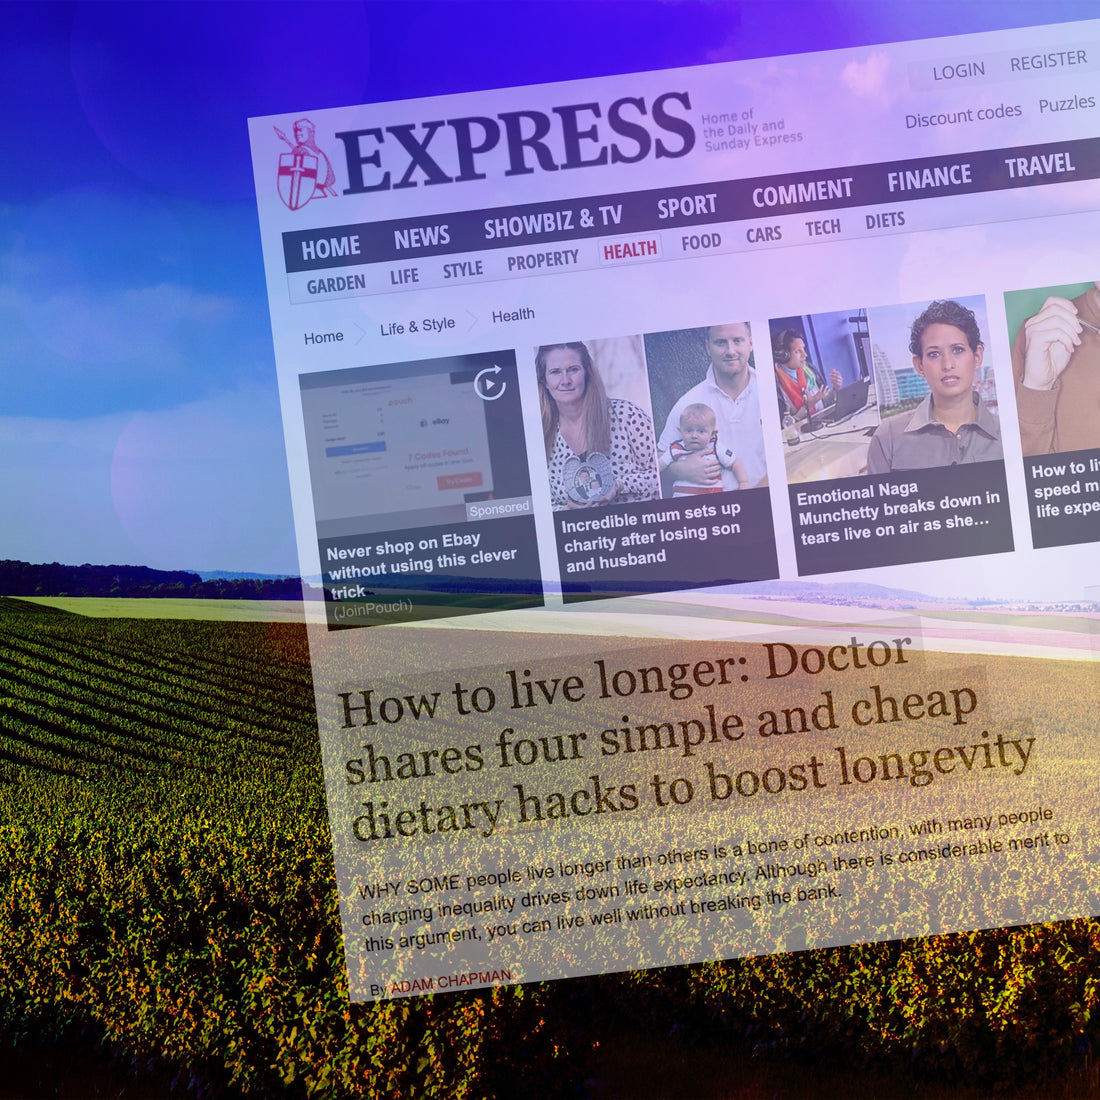 Britain's Daily Express features CurraNZ as a 'brilliant dietary hack' to boost longevity